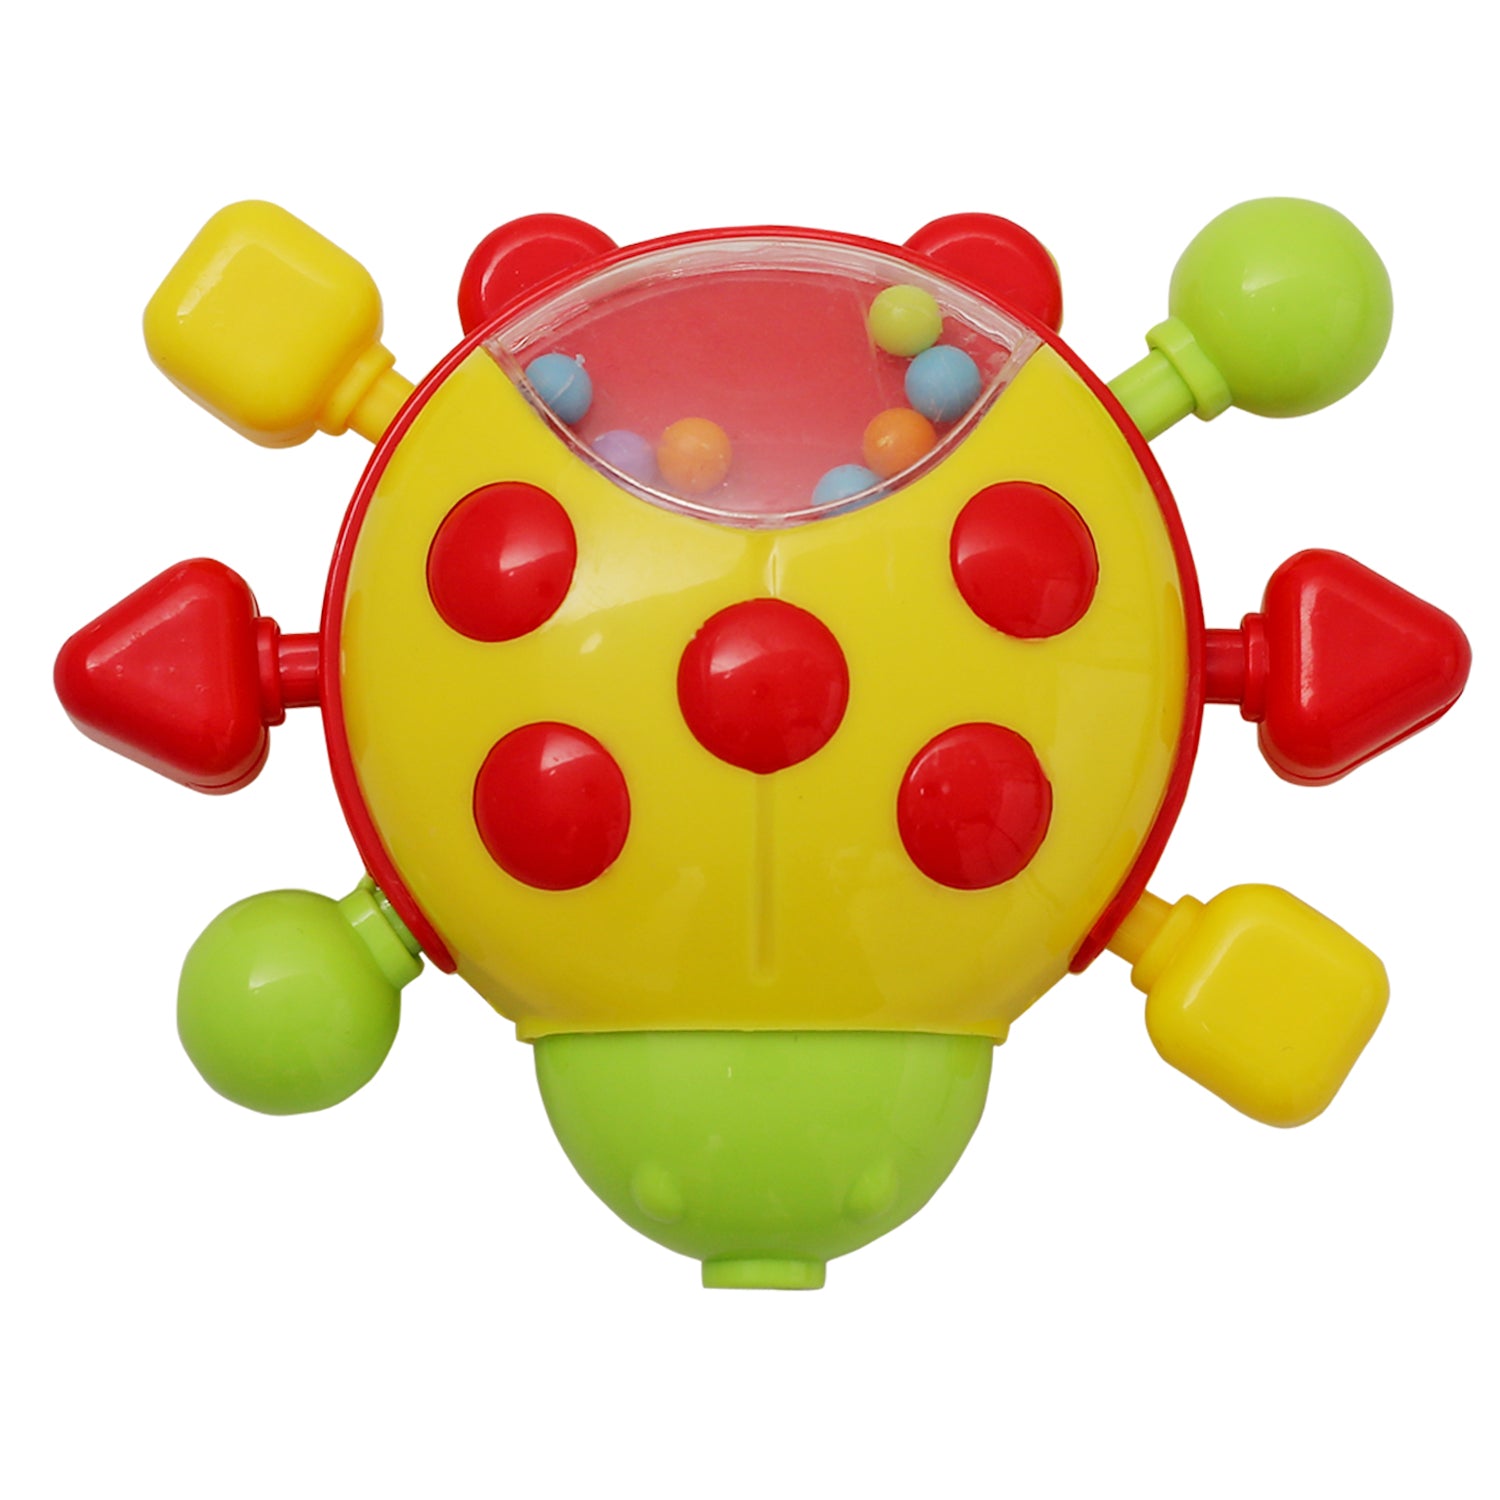 Premium Multicolour Set of 5 Musical Rattle Toys With Light - Baby Moo